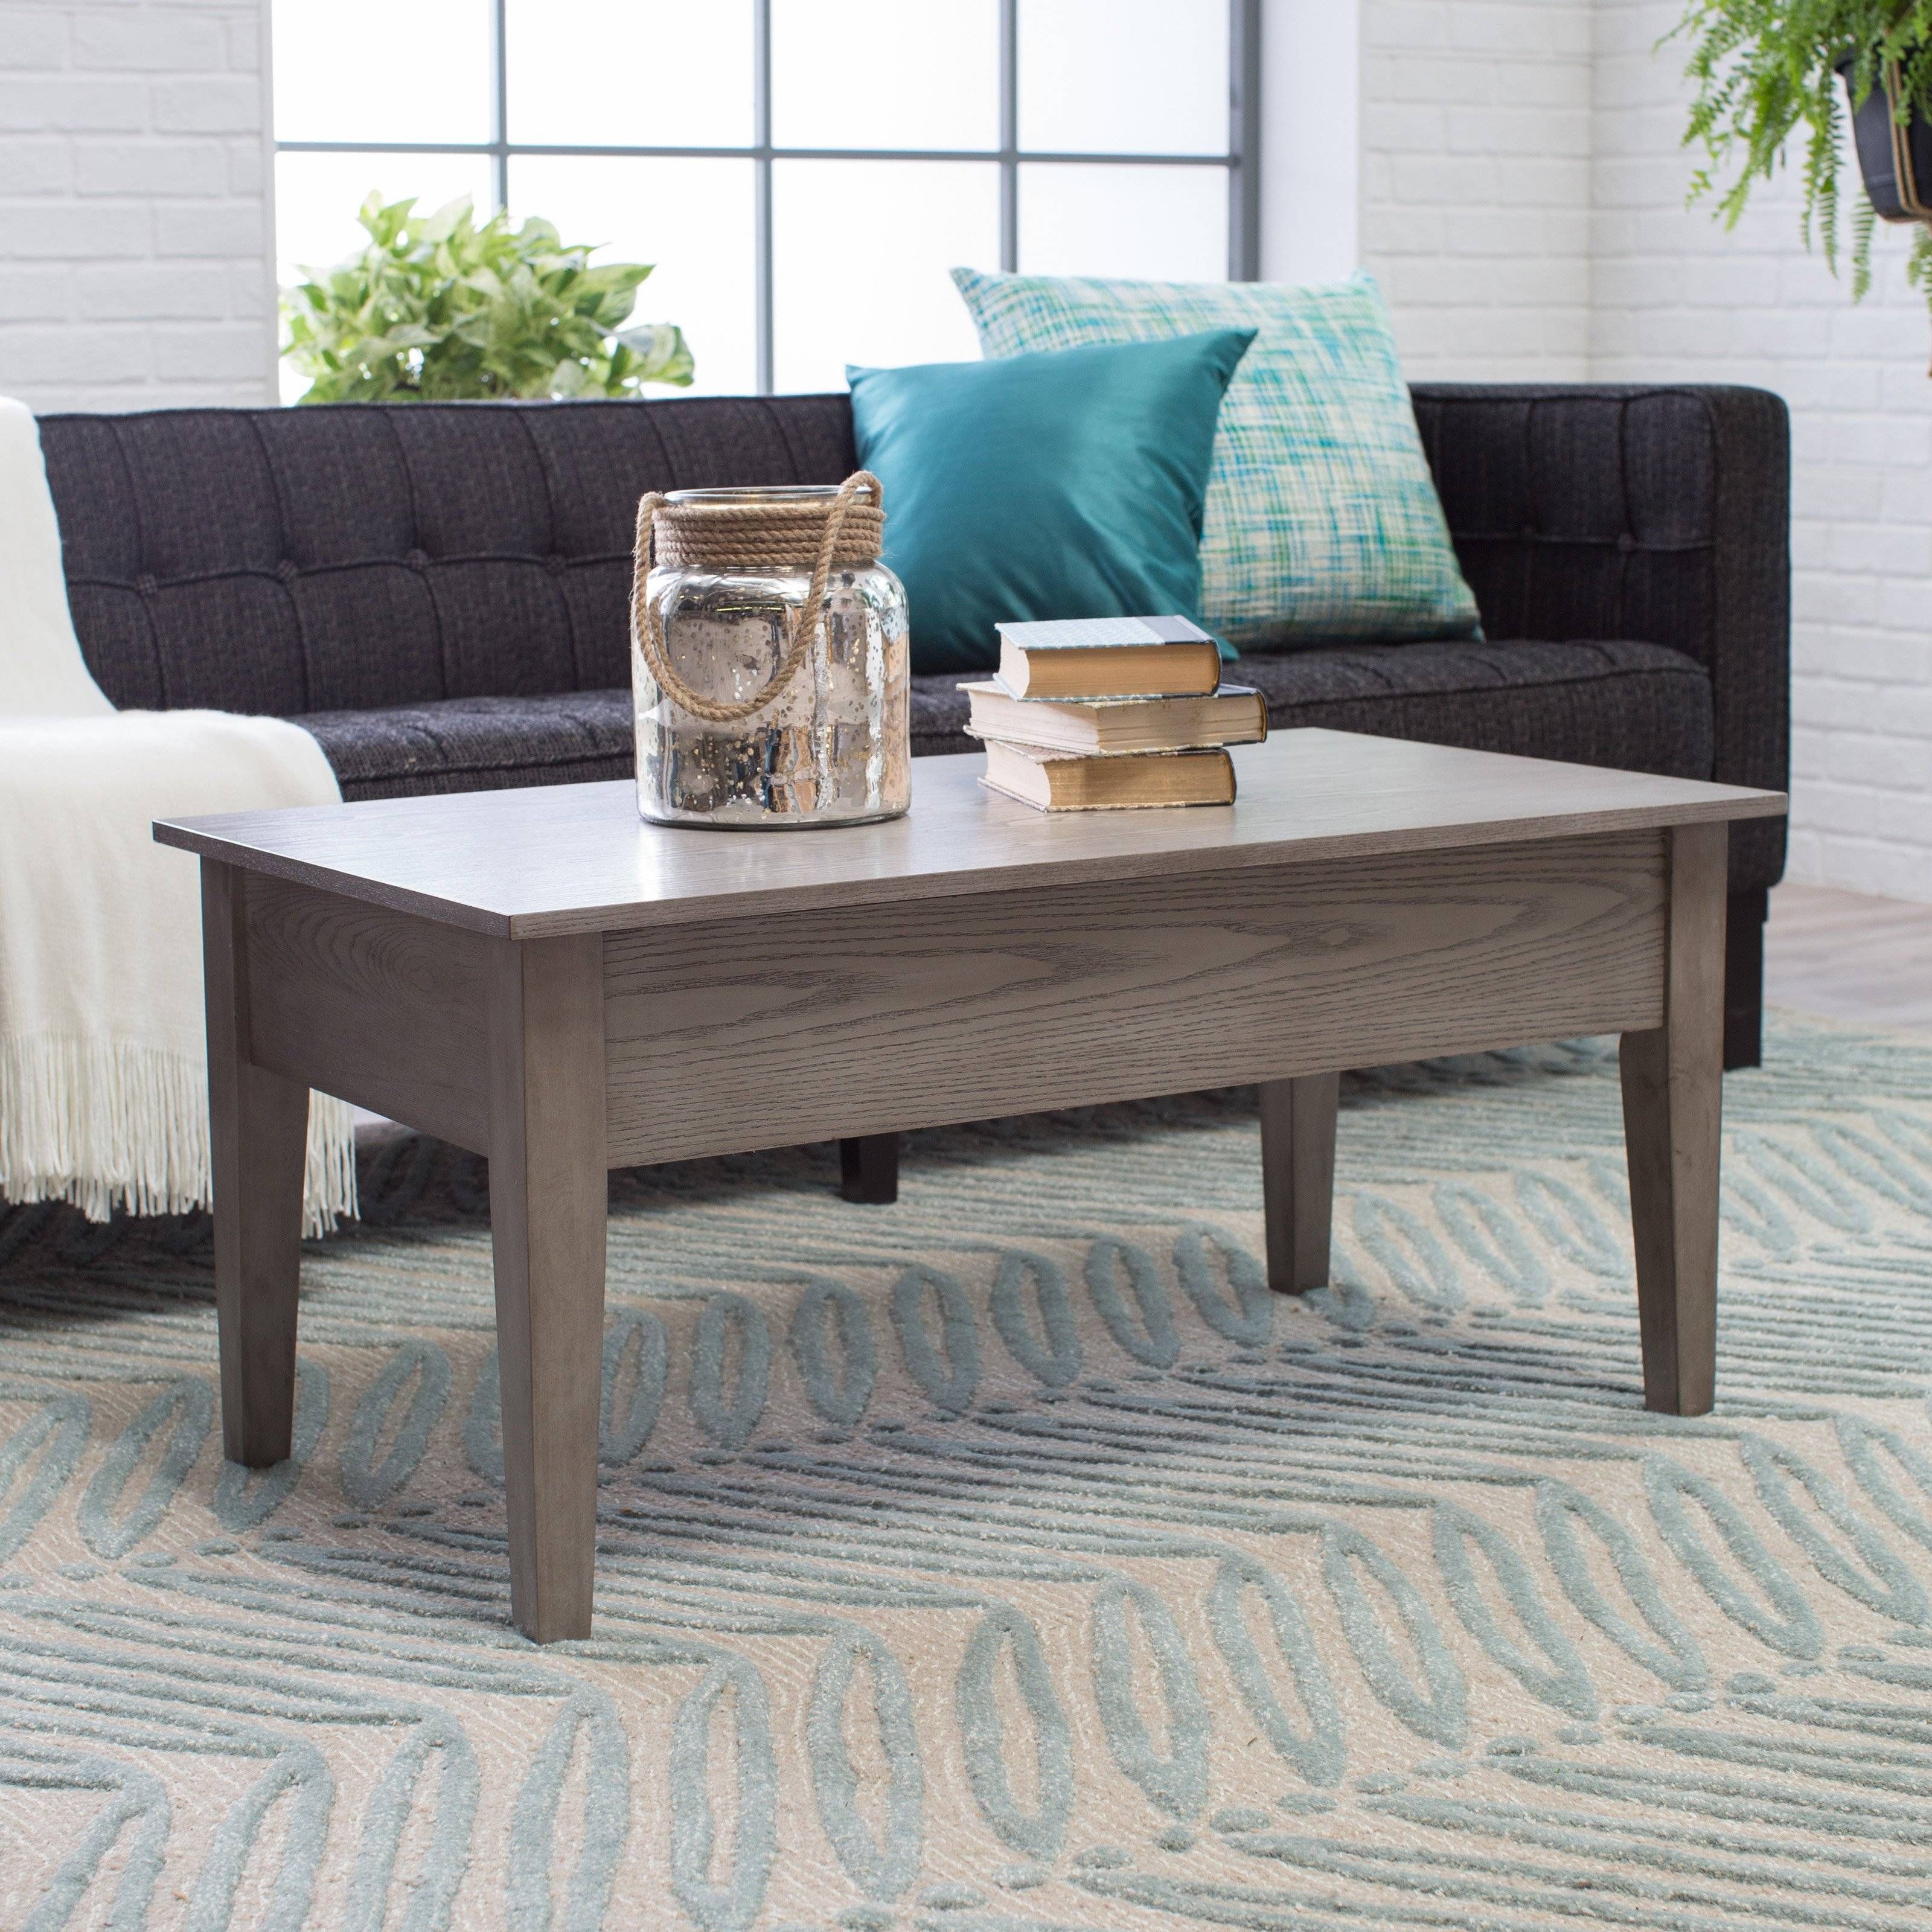 Turner Lift Top Coffee Table – Gray | Hayneedle Intended For Top Lift Coffee Tables (View 7 of 30)